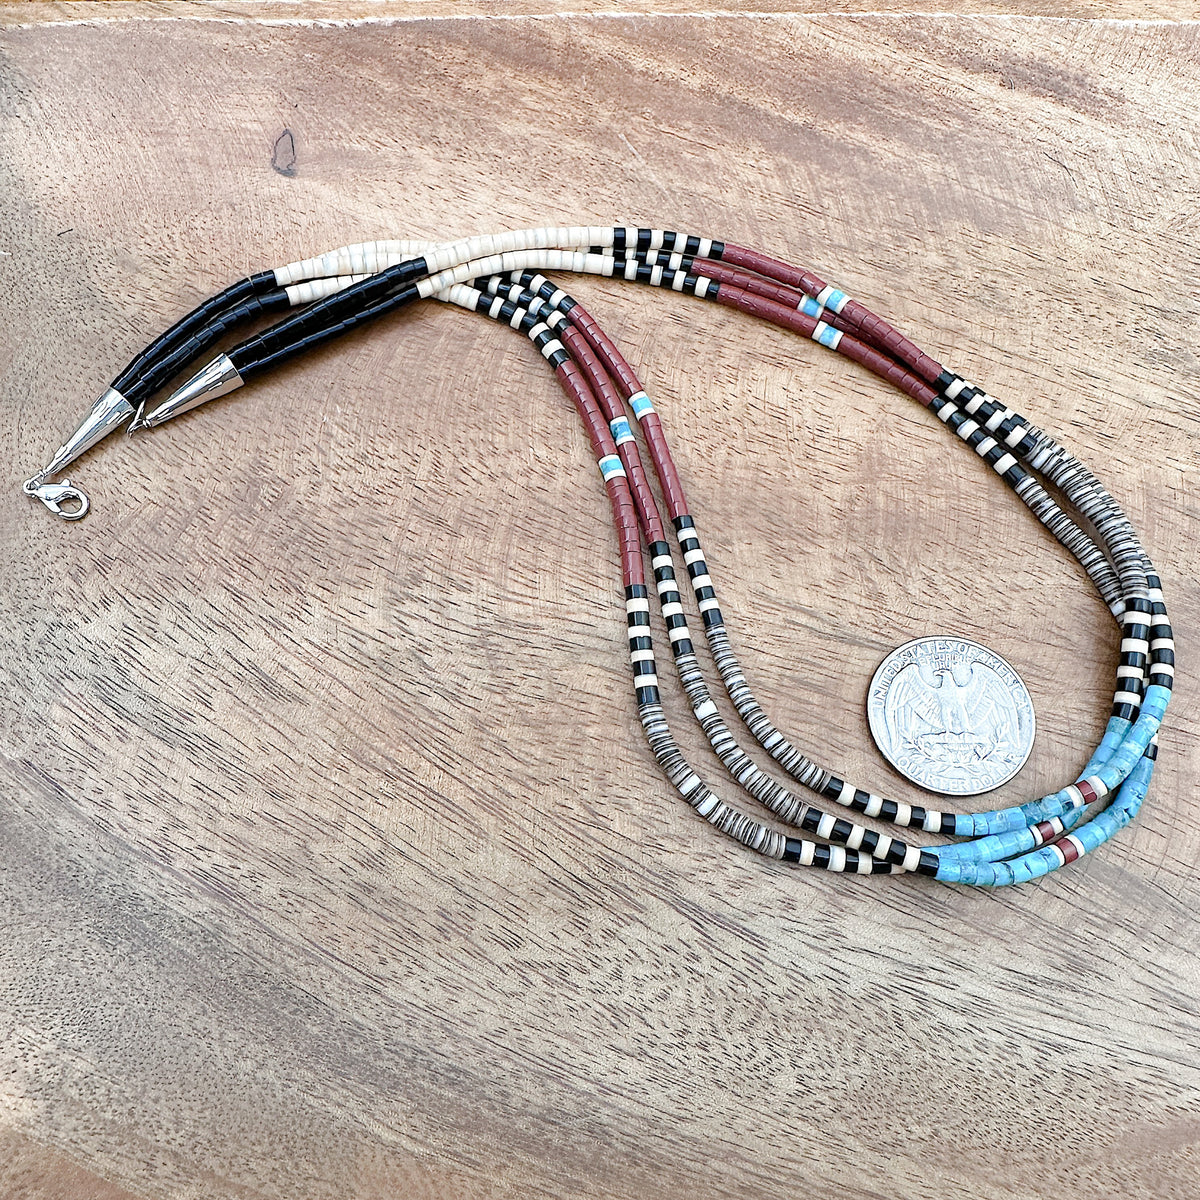 Size comparison of a US quarter coin and a handmade three strand Heishi necklace that features a variety of stones and shells with sterling silver findings.